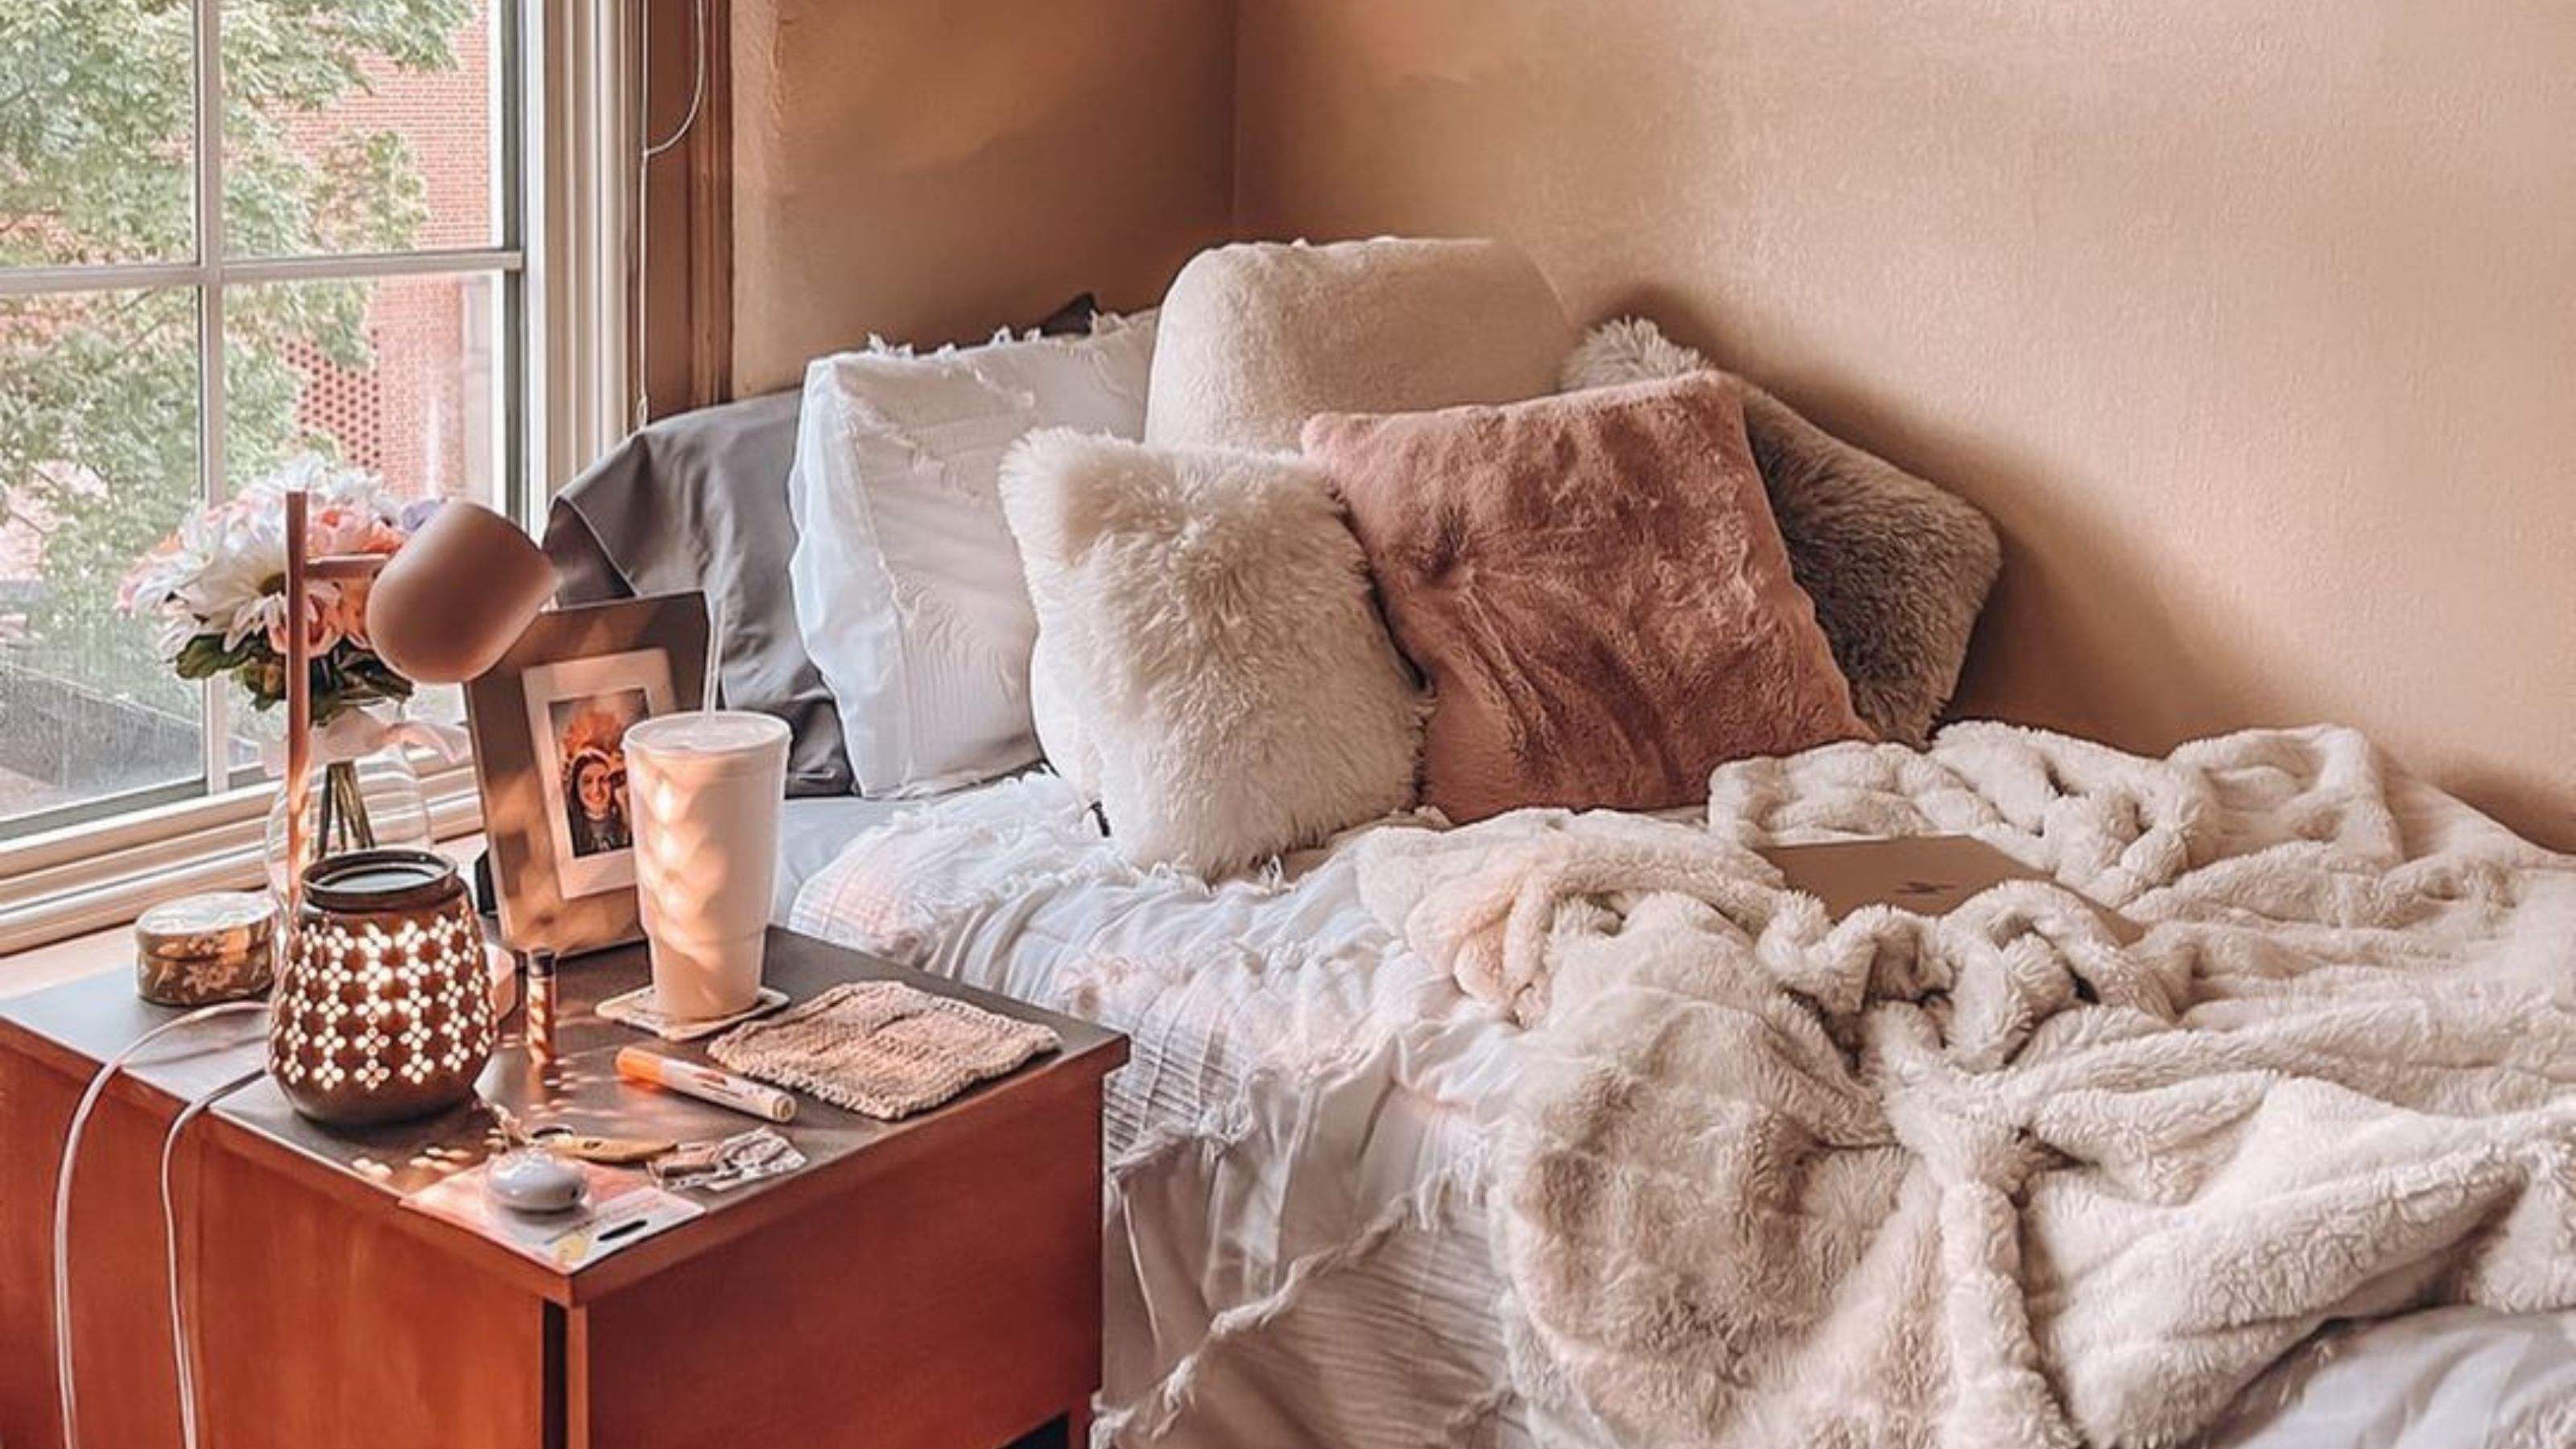 7+ cozy dorm room ideas that are utterly dreamy